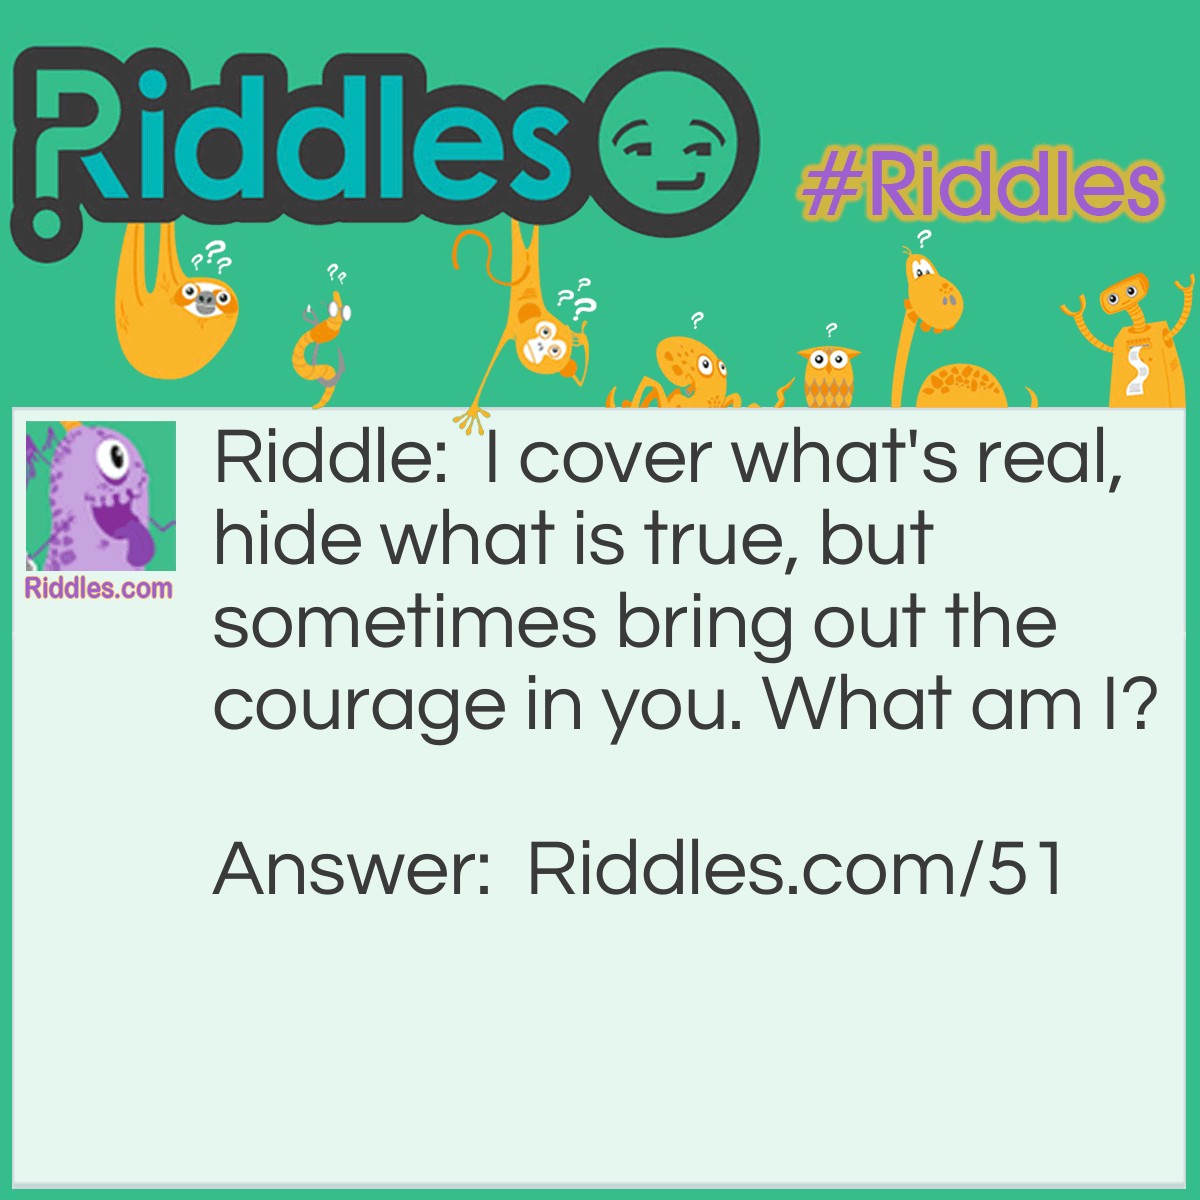 Riddle: I cover what's real, hide what is true, but sometimes bring out the courage in you. What am I? Answer: Makeup.